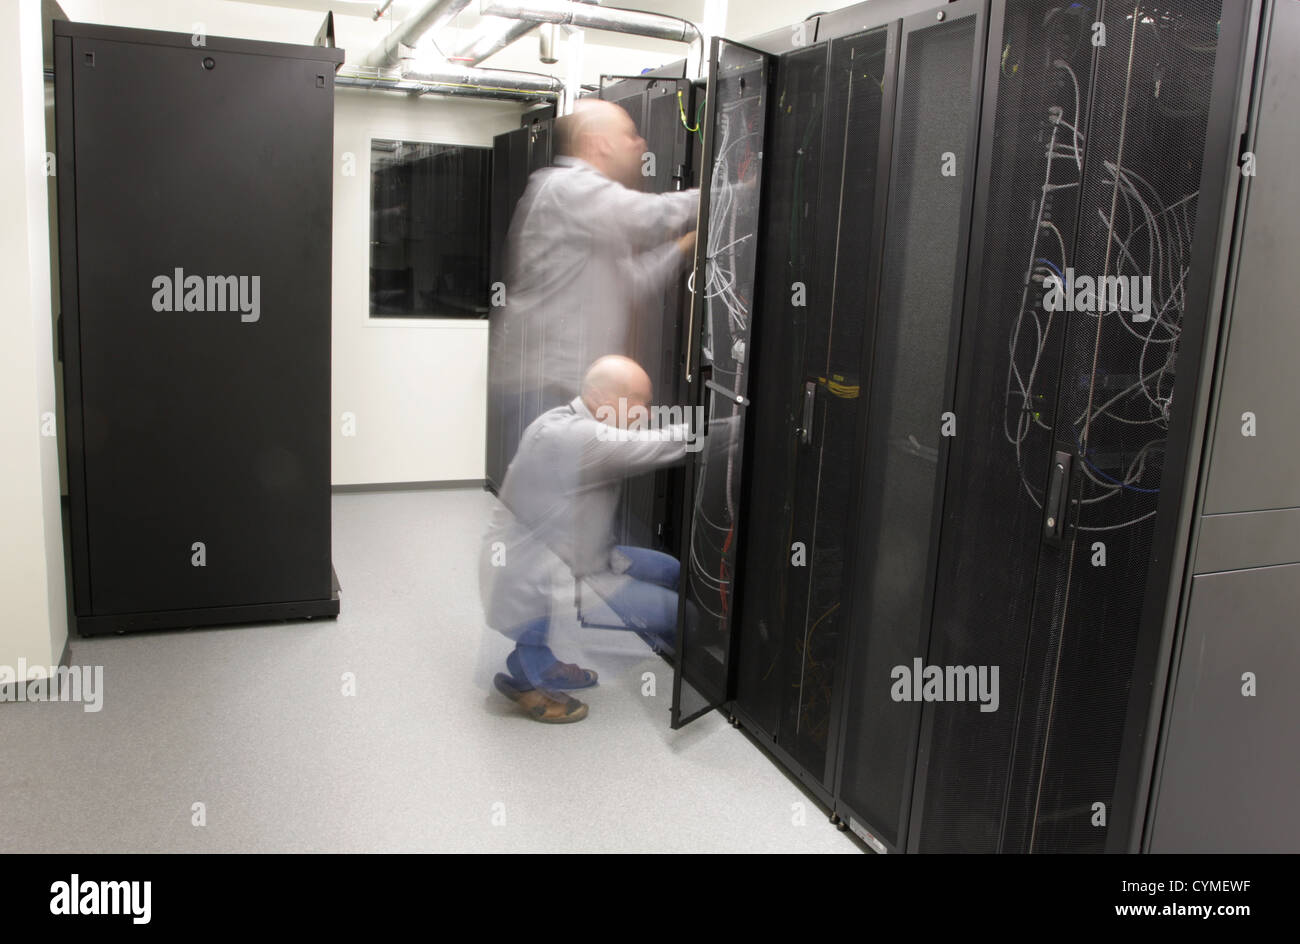 Network technician doing preventive work on a network, long exposure blurres person Stock Photo